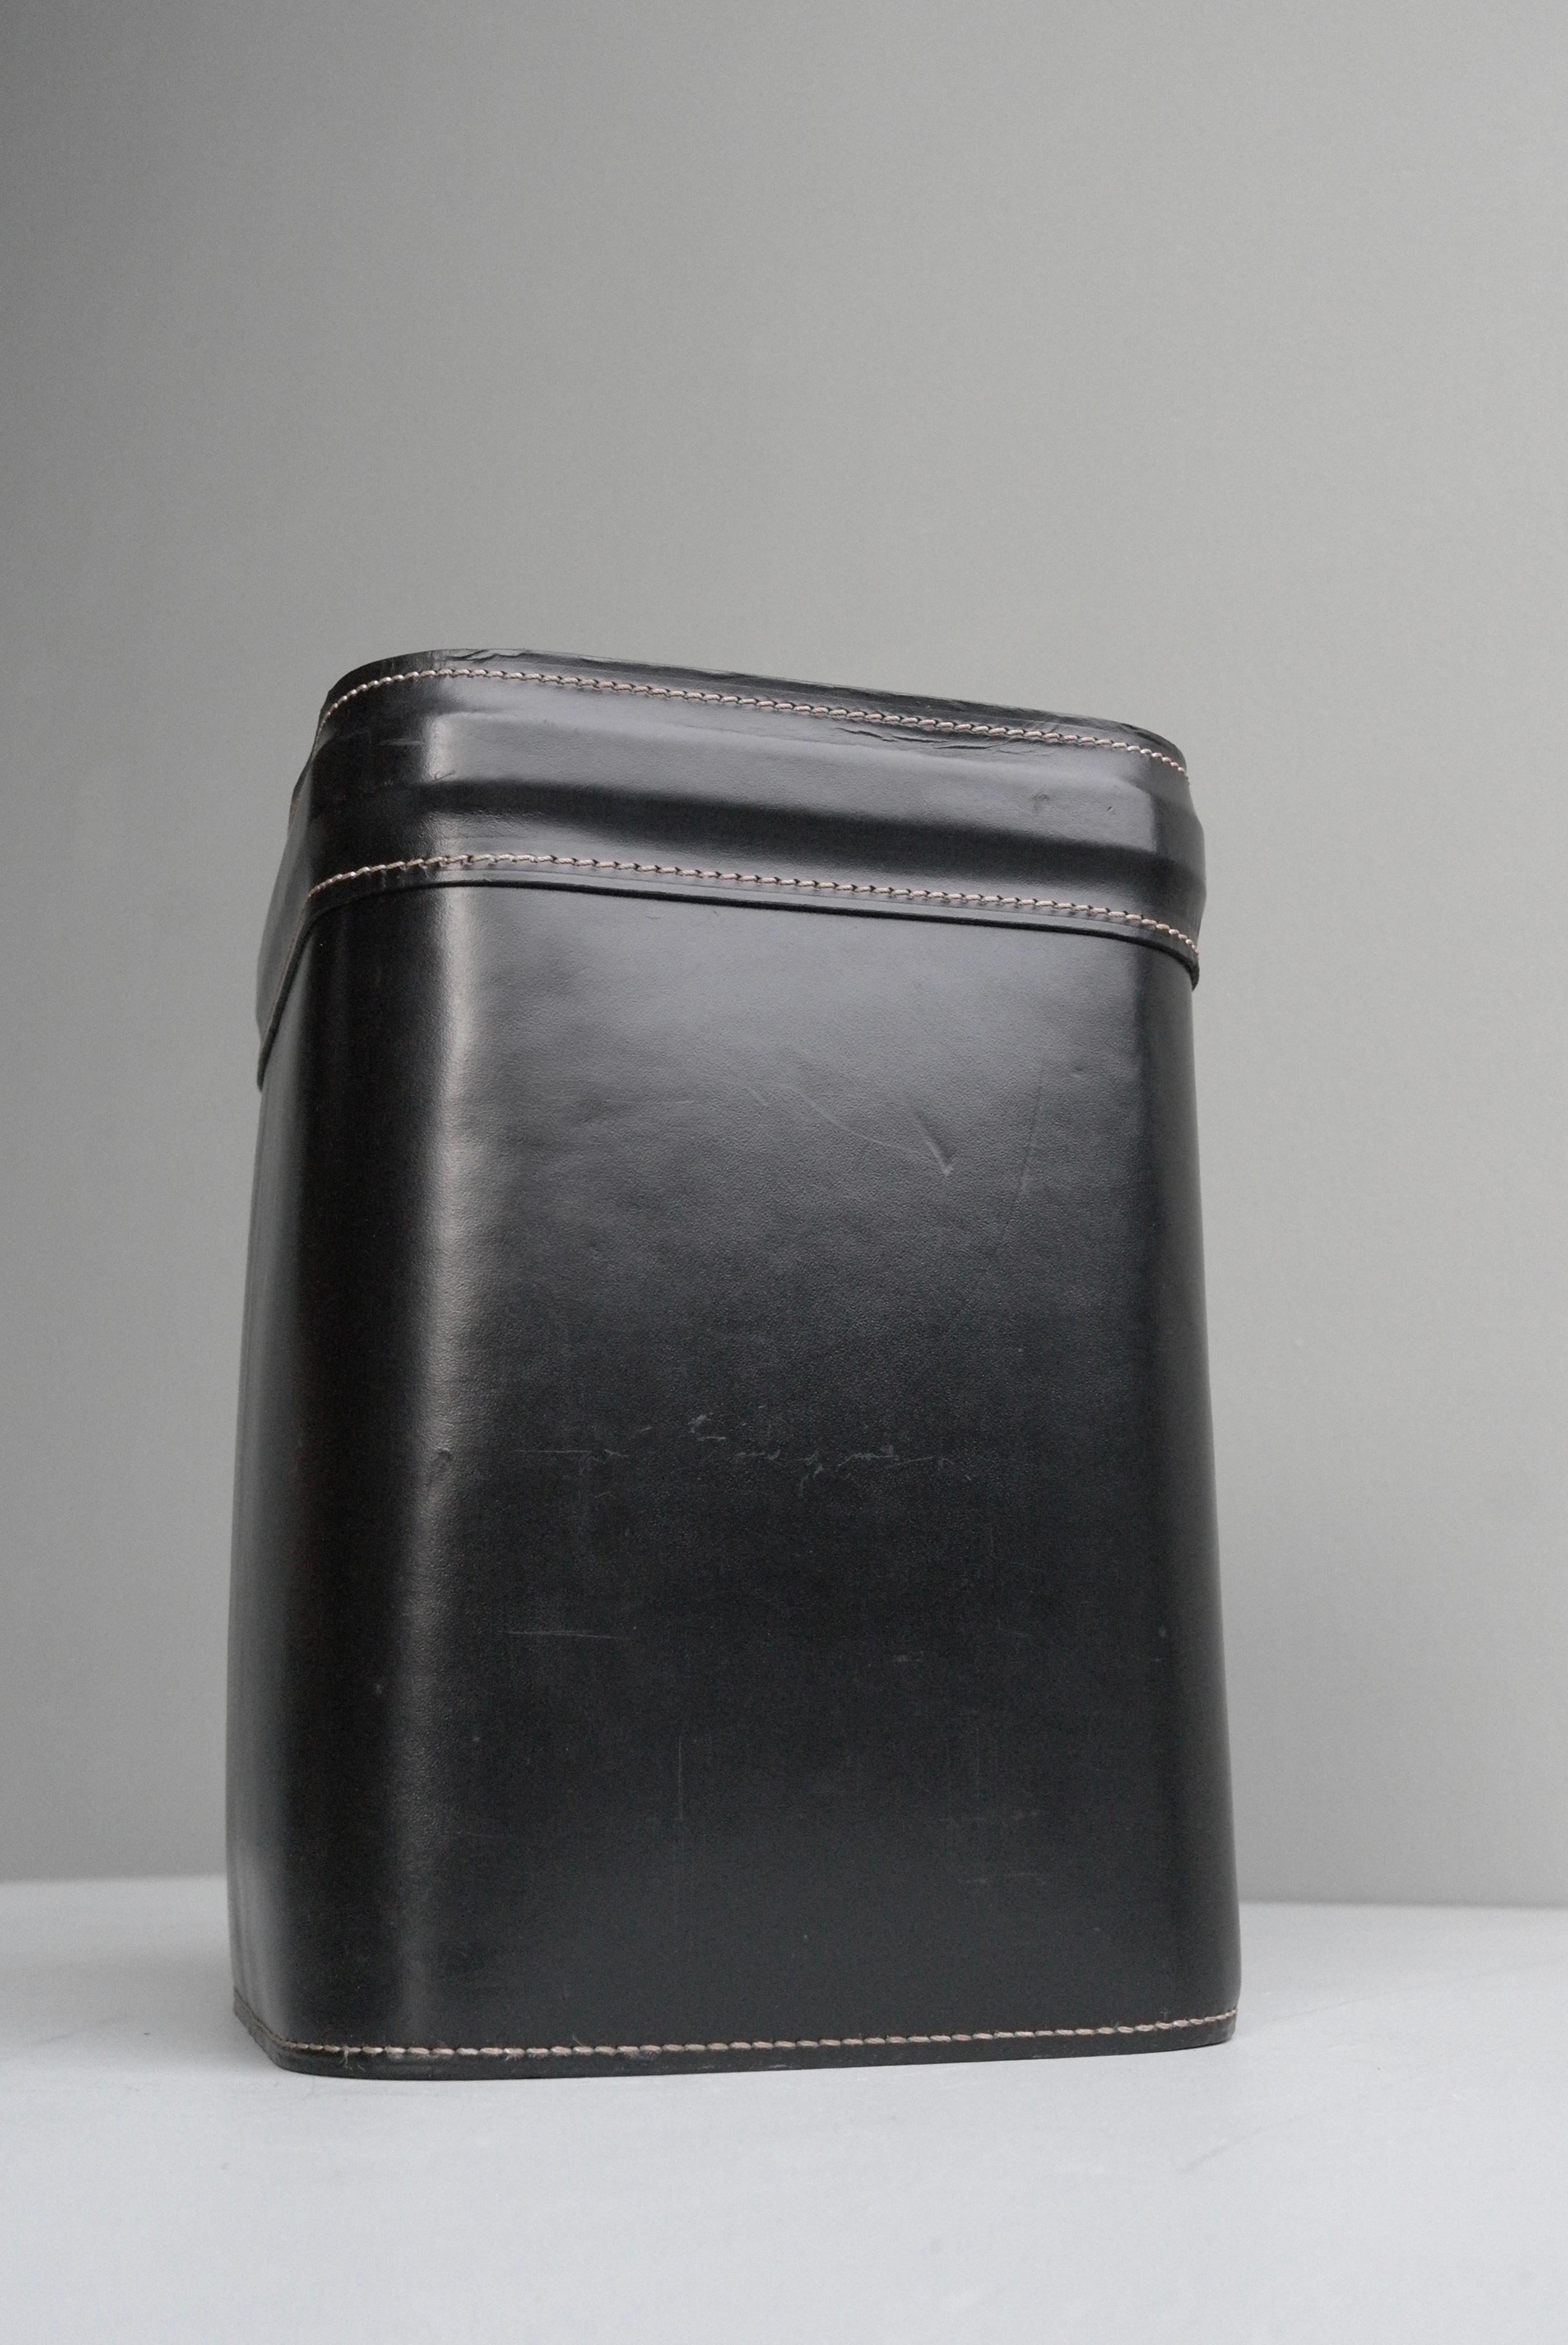 French Hand Stitched Black Leather Waste Paper Basket 4